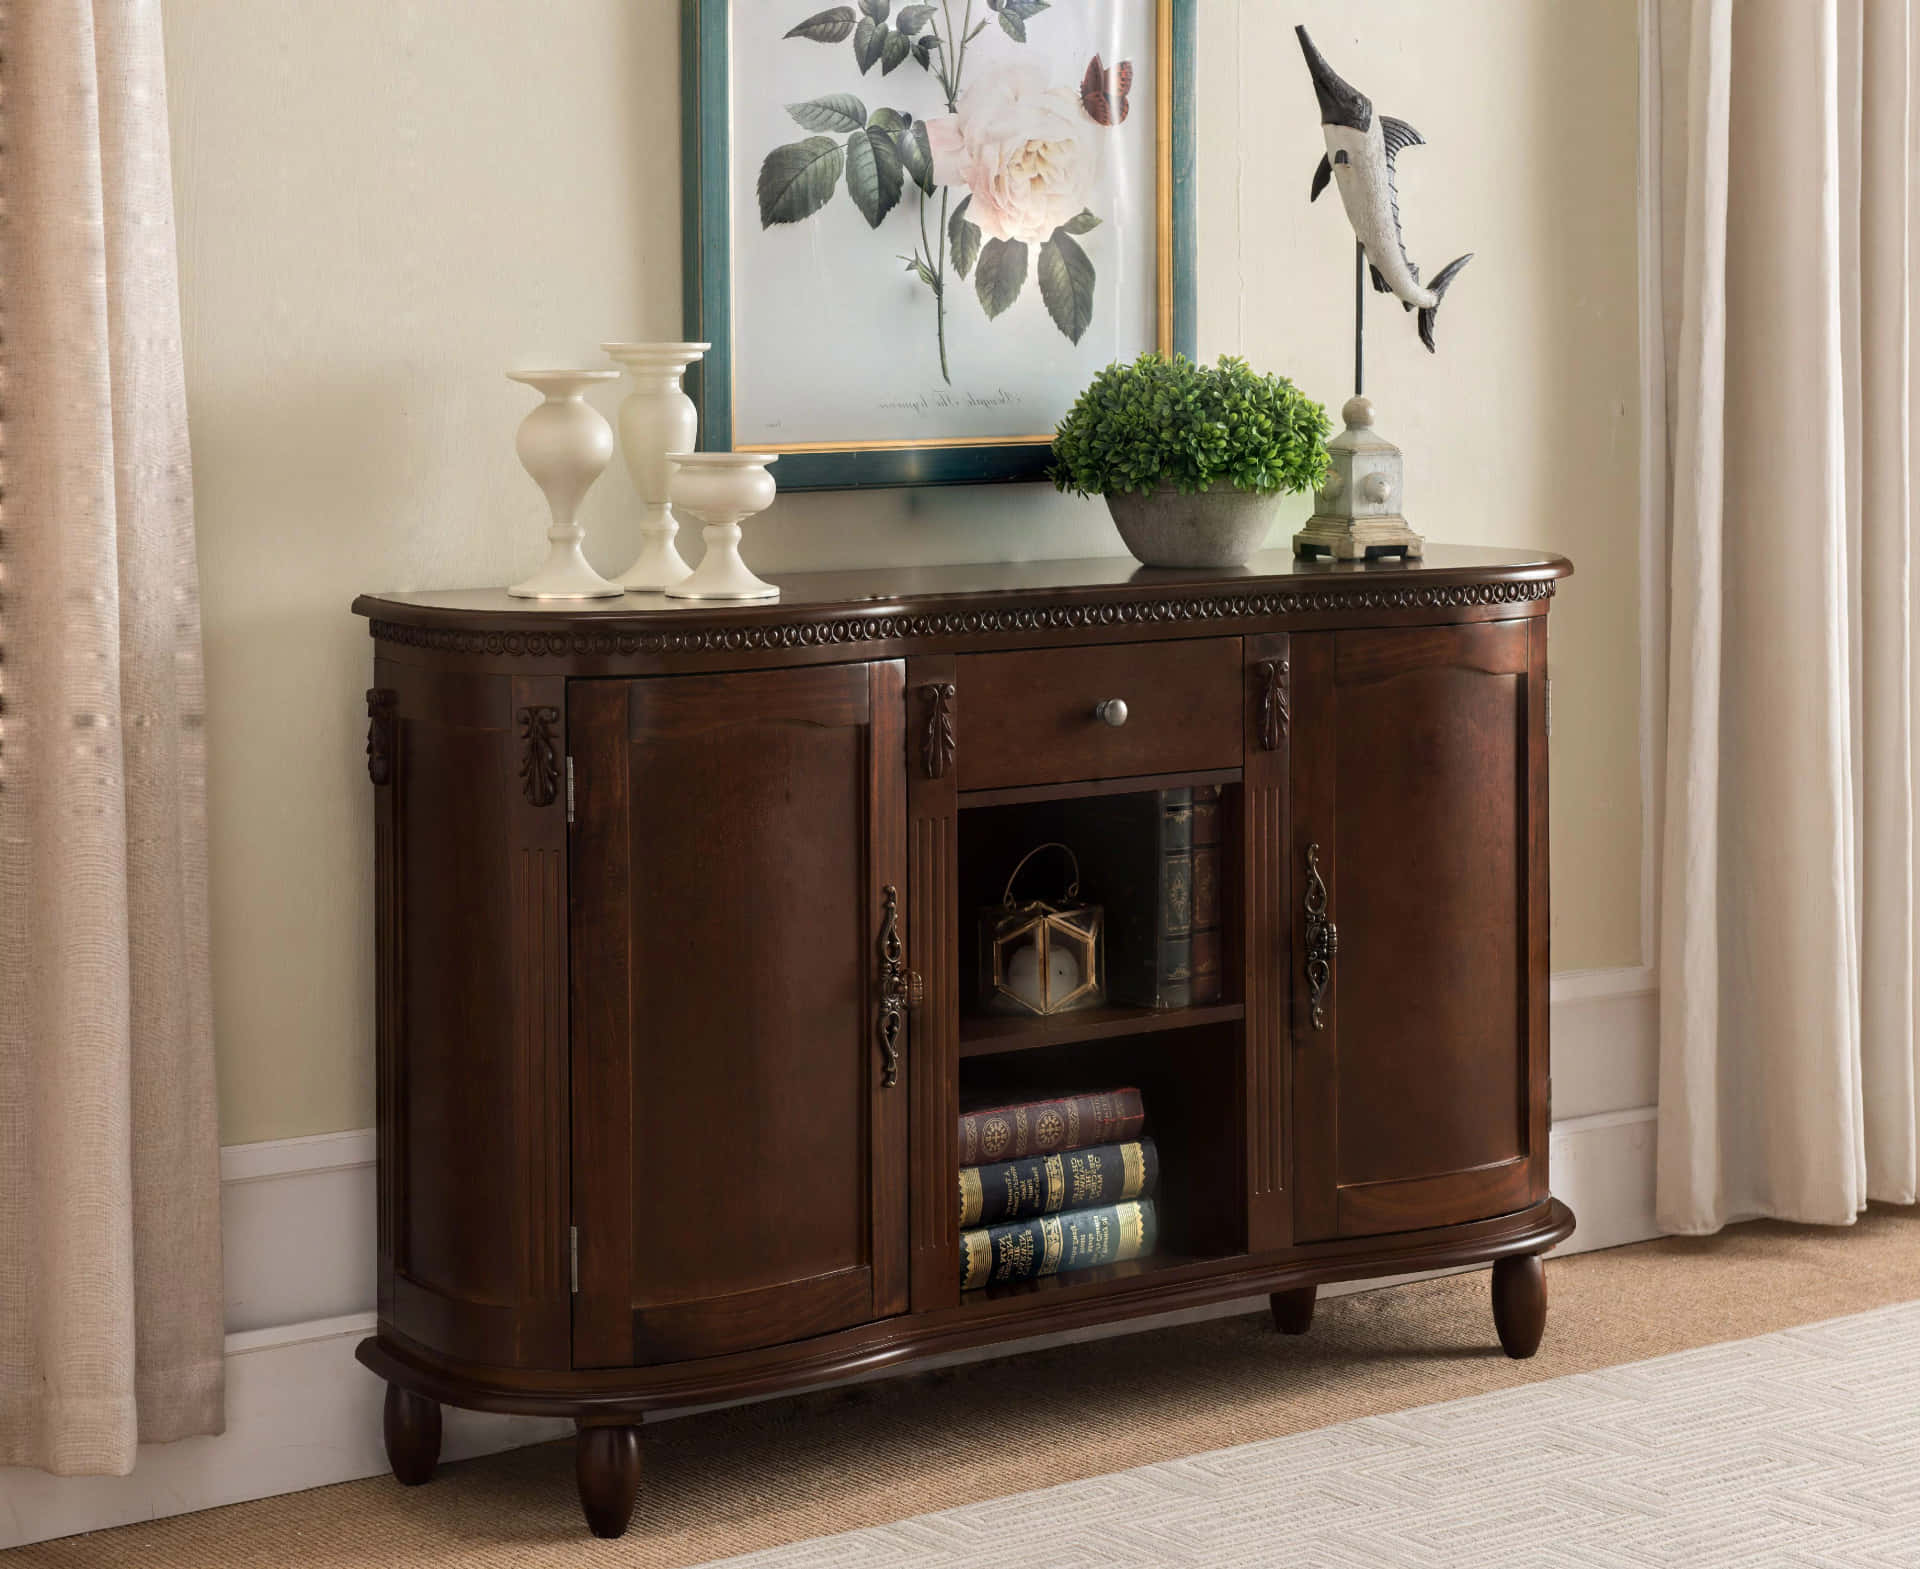 A Brown Wooden Sideboard With A Picture On It